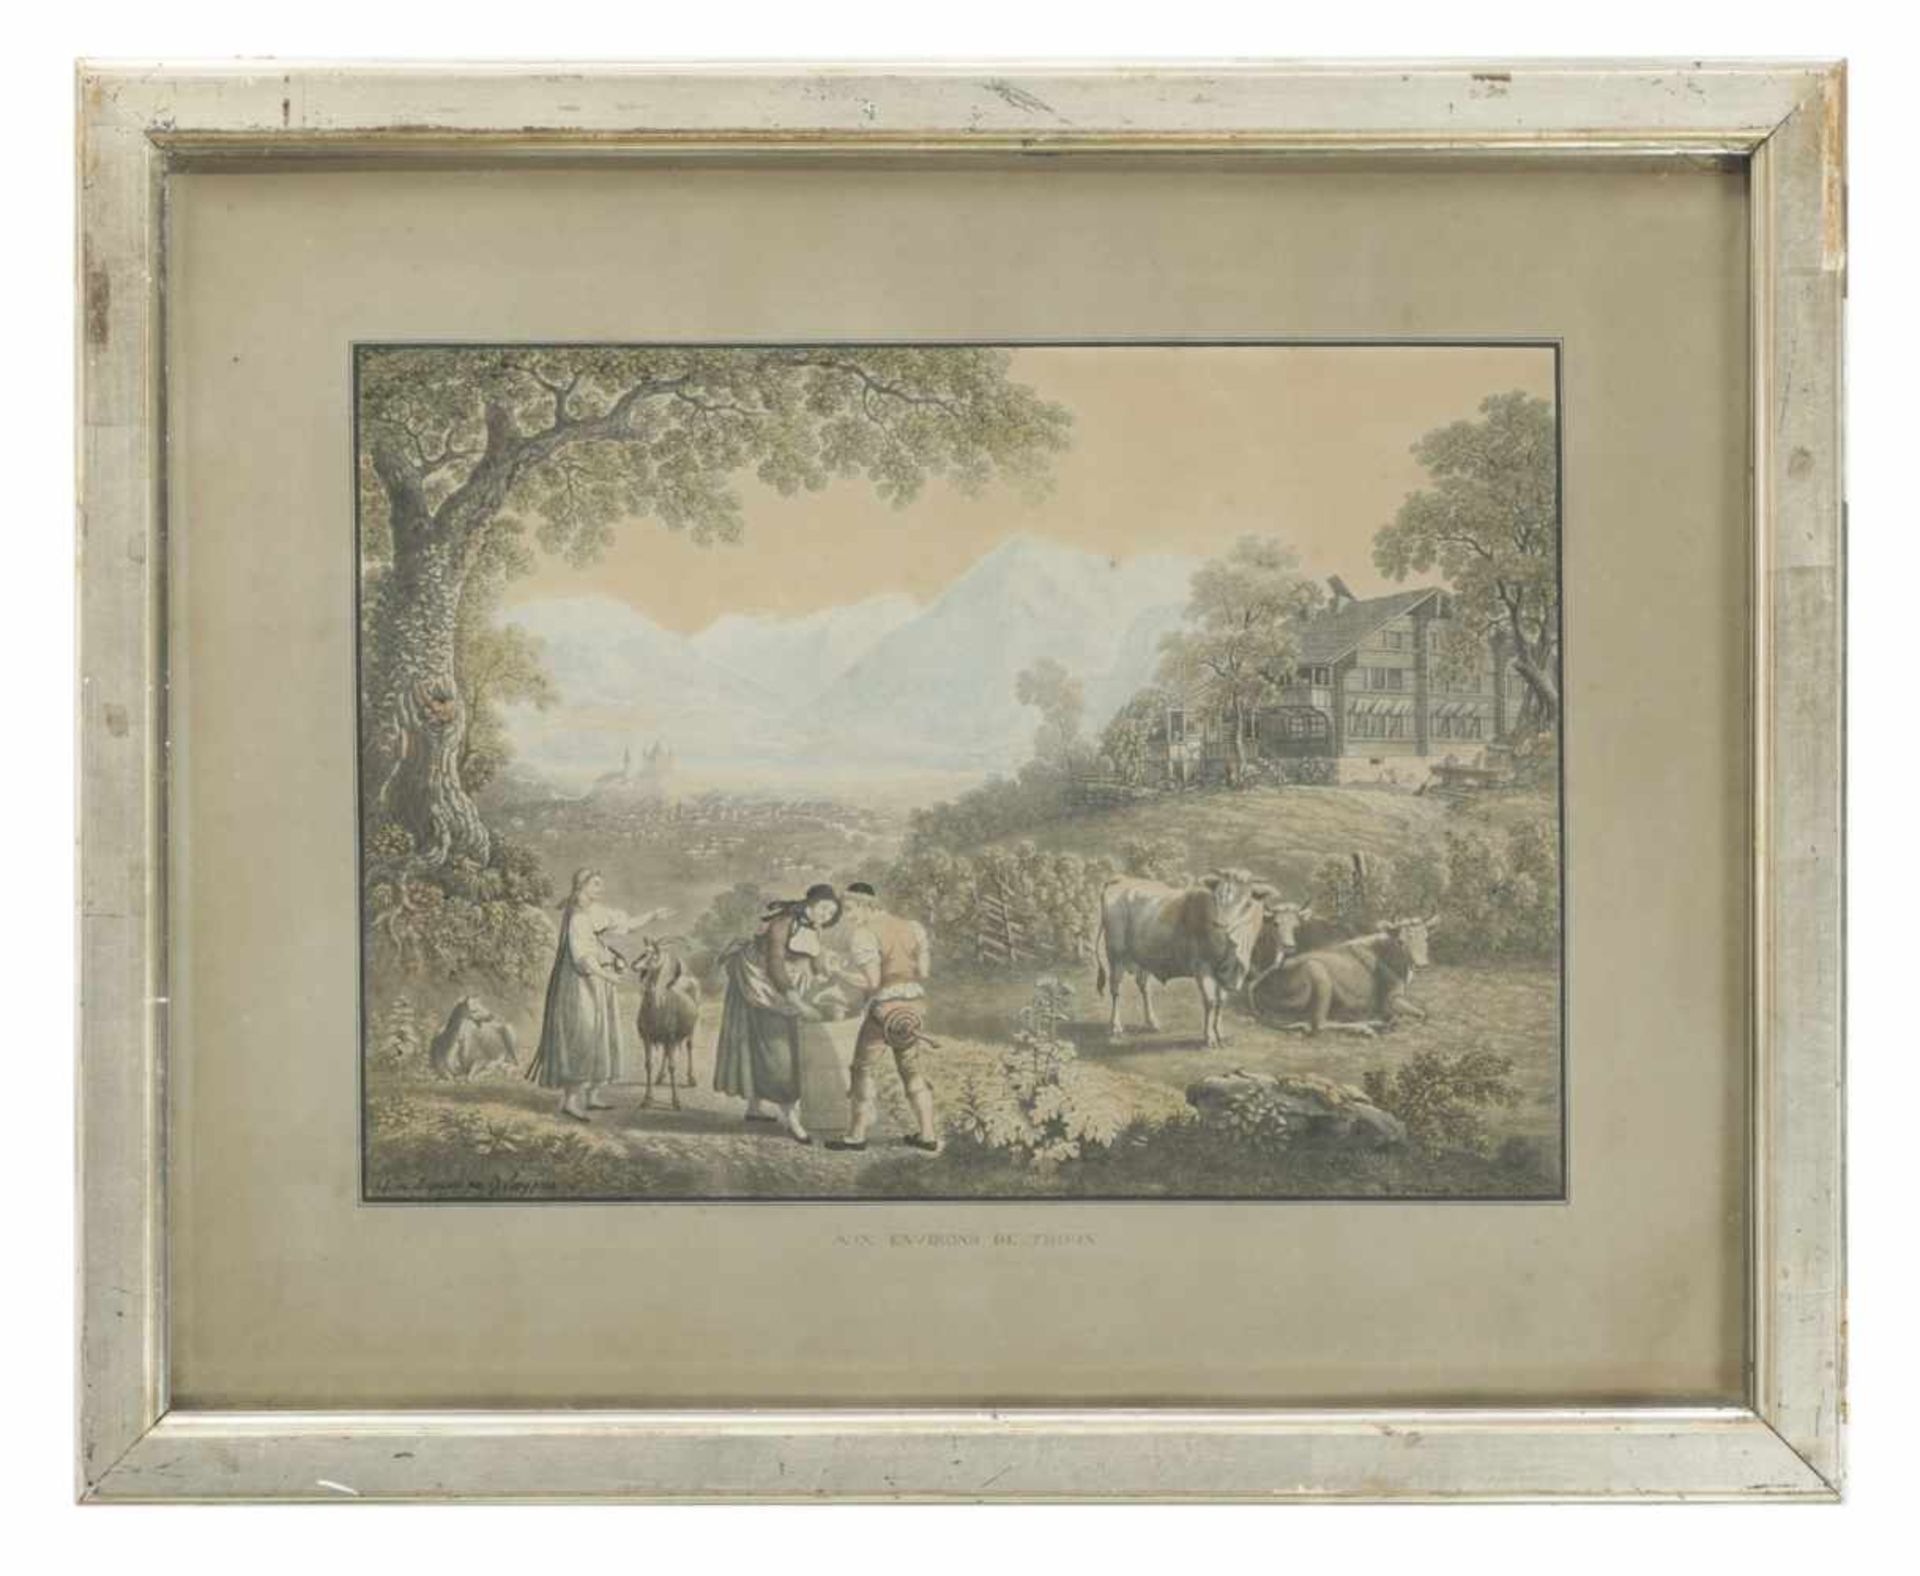 Gabriel II LORY (1784-1846), Aux Environ De Thoun, etching, dated lower right 1818 (?). - Image 2 of 2